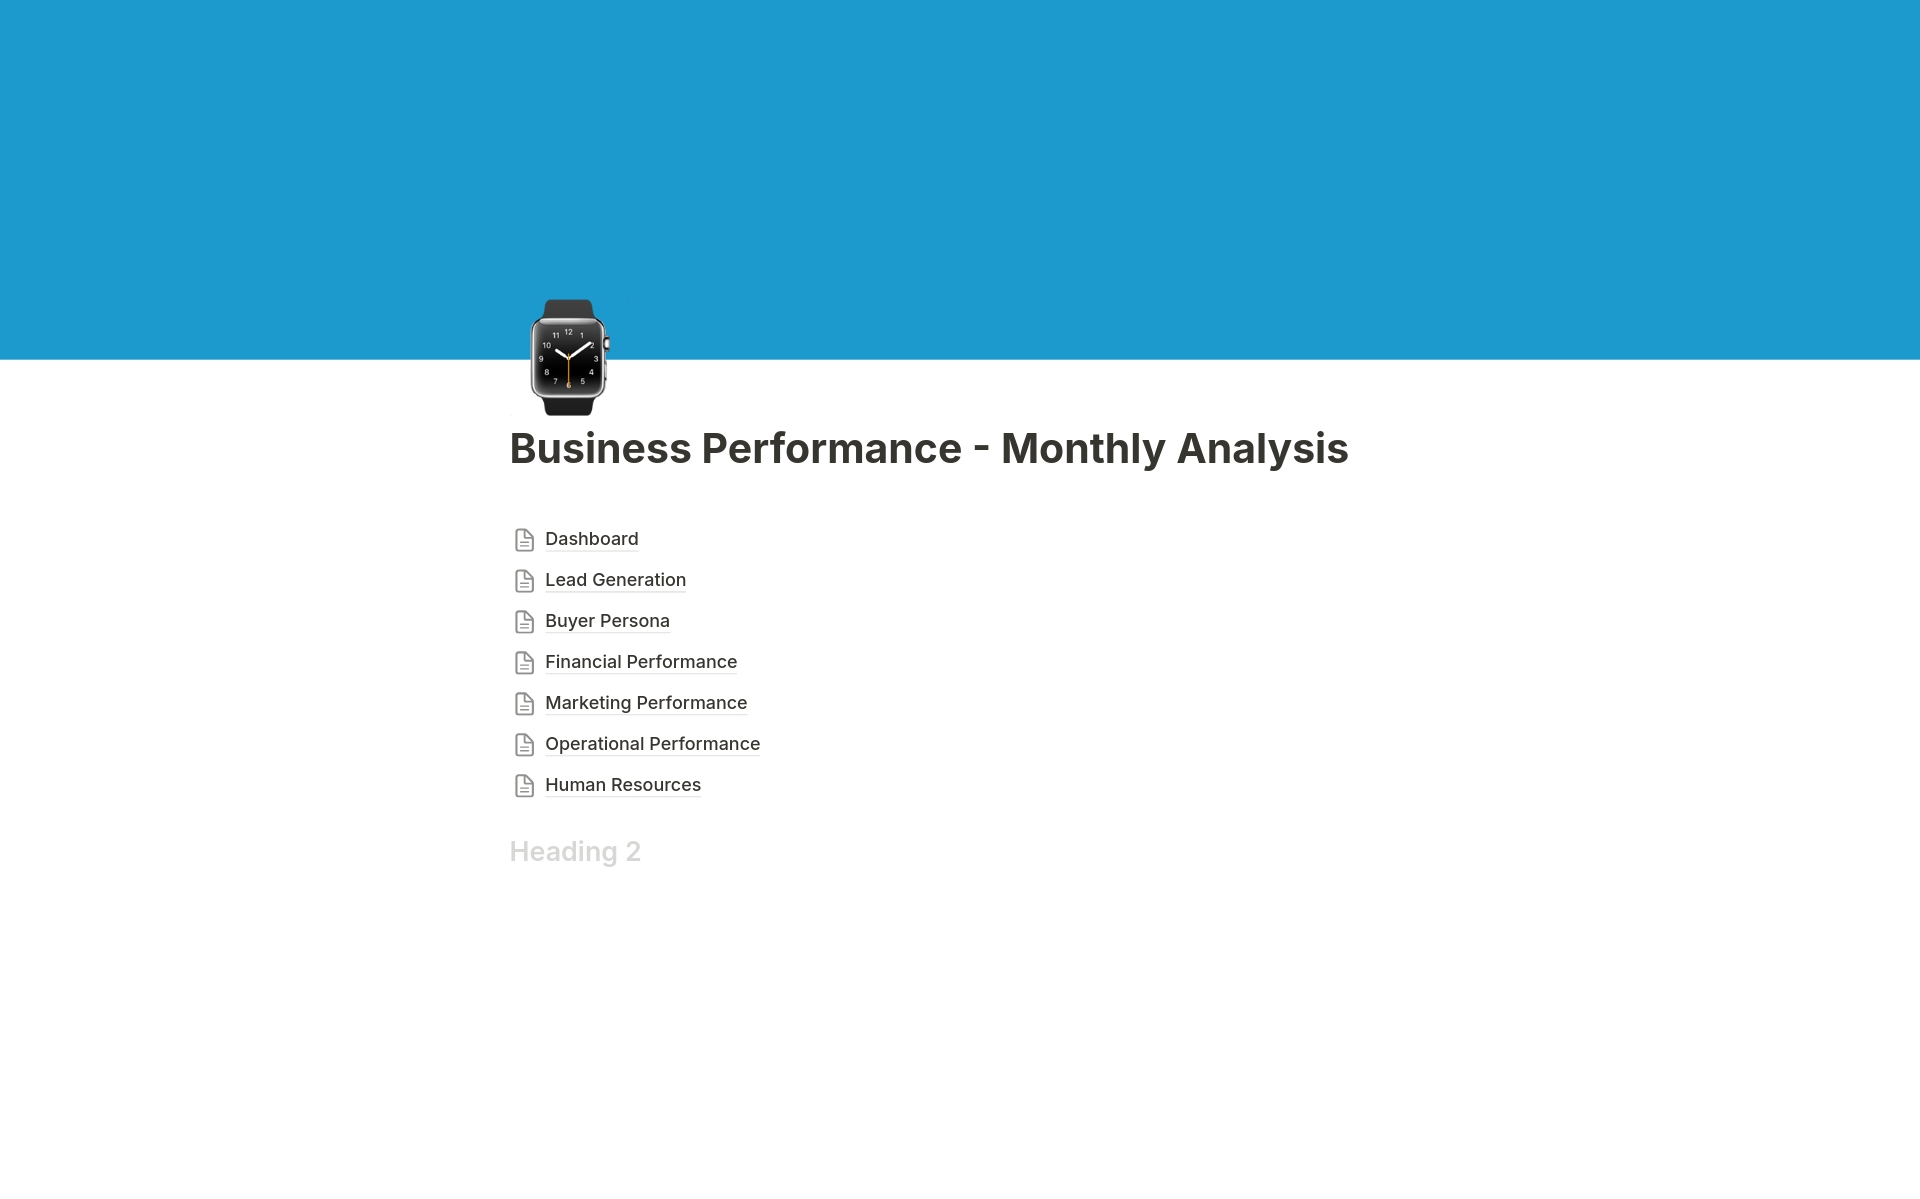 Business Performance Analysis Template: Evaluate financial (revenue, profitability), operational (efficiency, quality), market (customer acquisition, satisfaction), and strategic metrics. Ideal for assessing performance, identifying trends, and guiding growth strategies. 